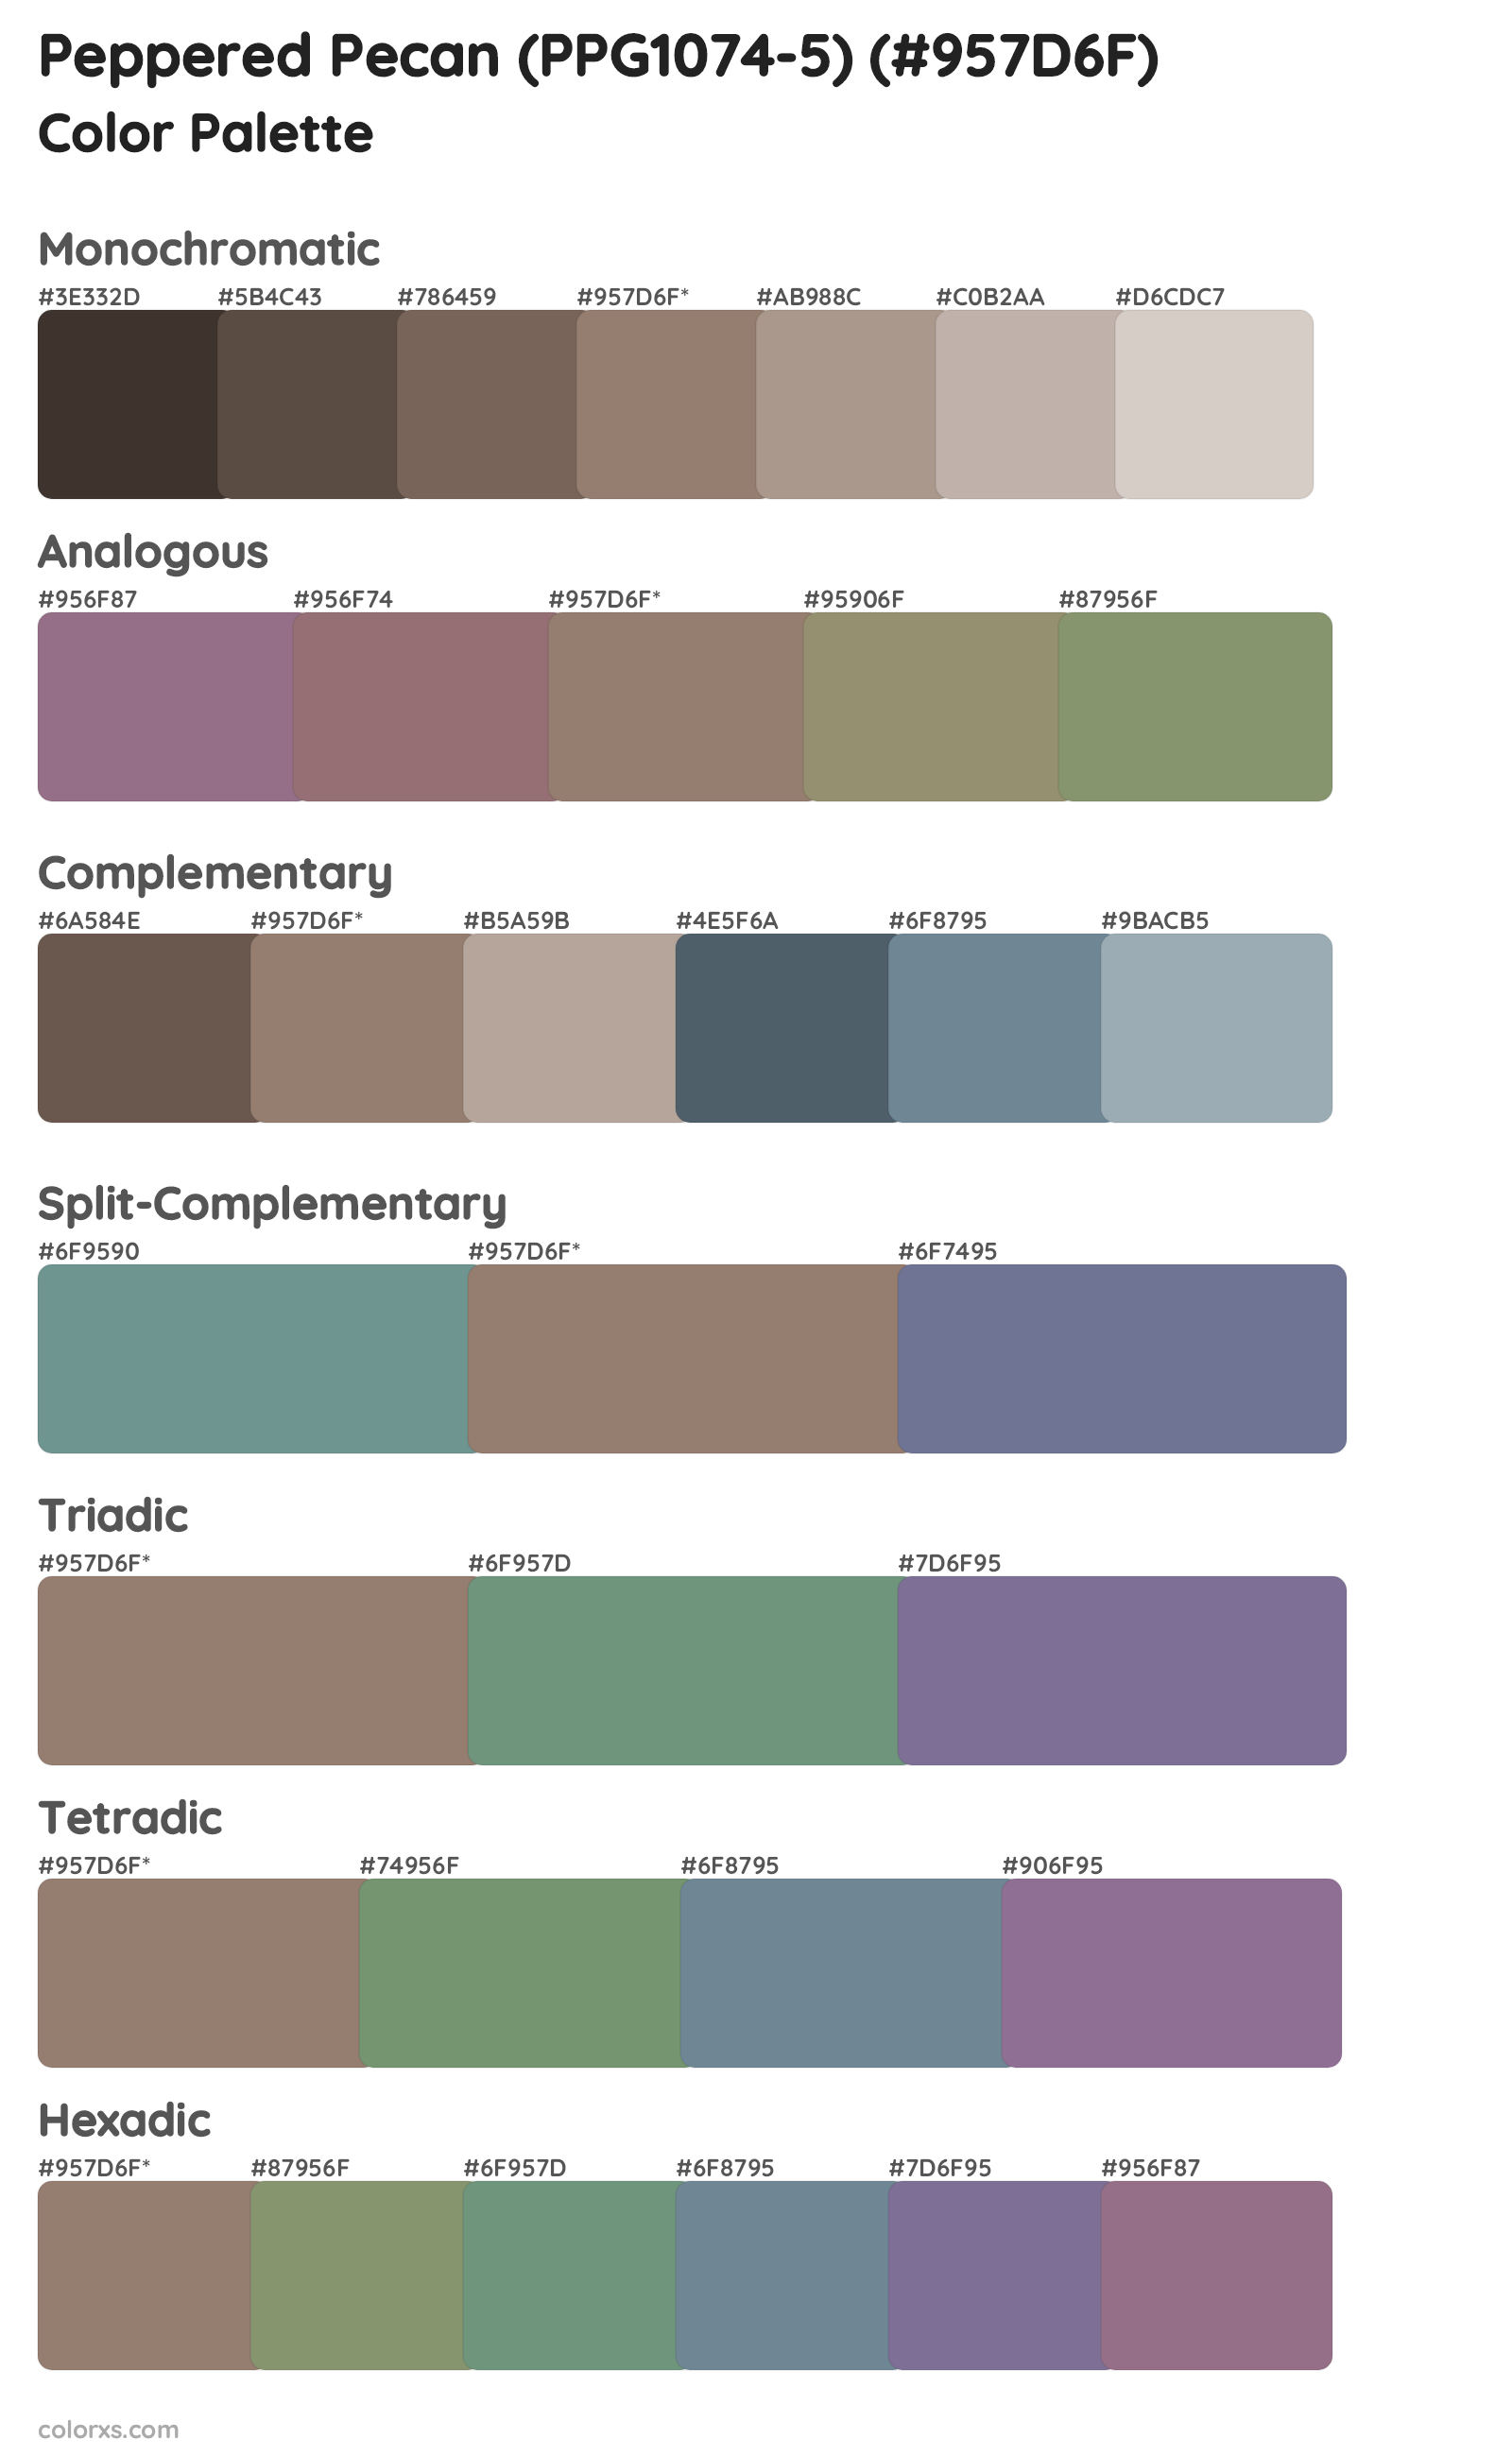 Peppered Pecan (PPG1074-5) Color Scheme Palettes